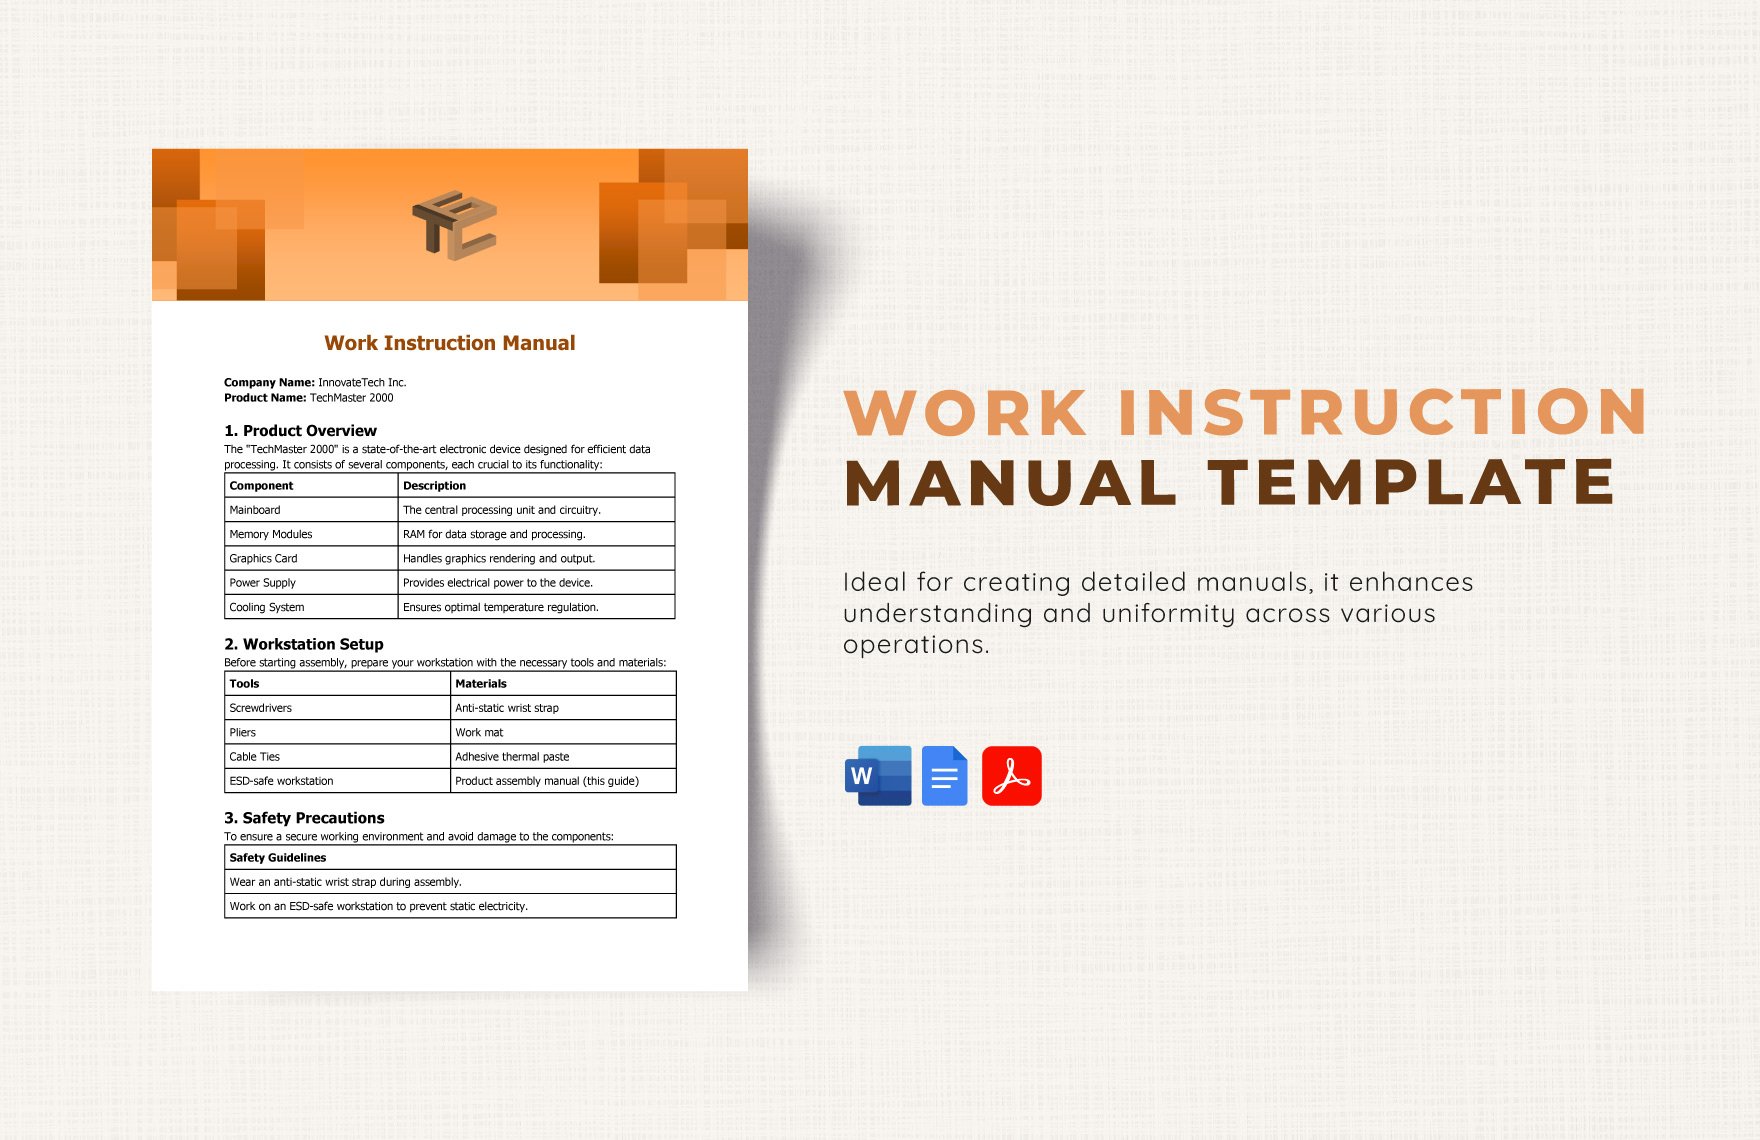 Work Instruction Manual Template